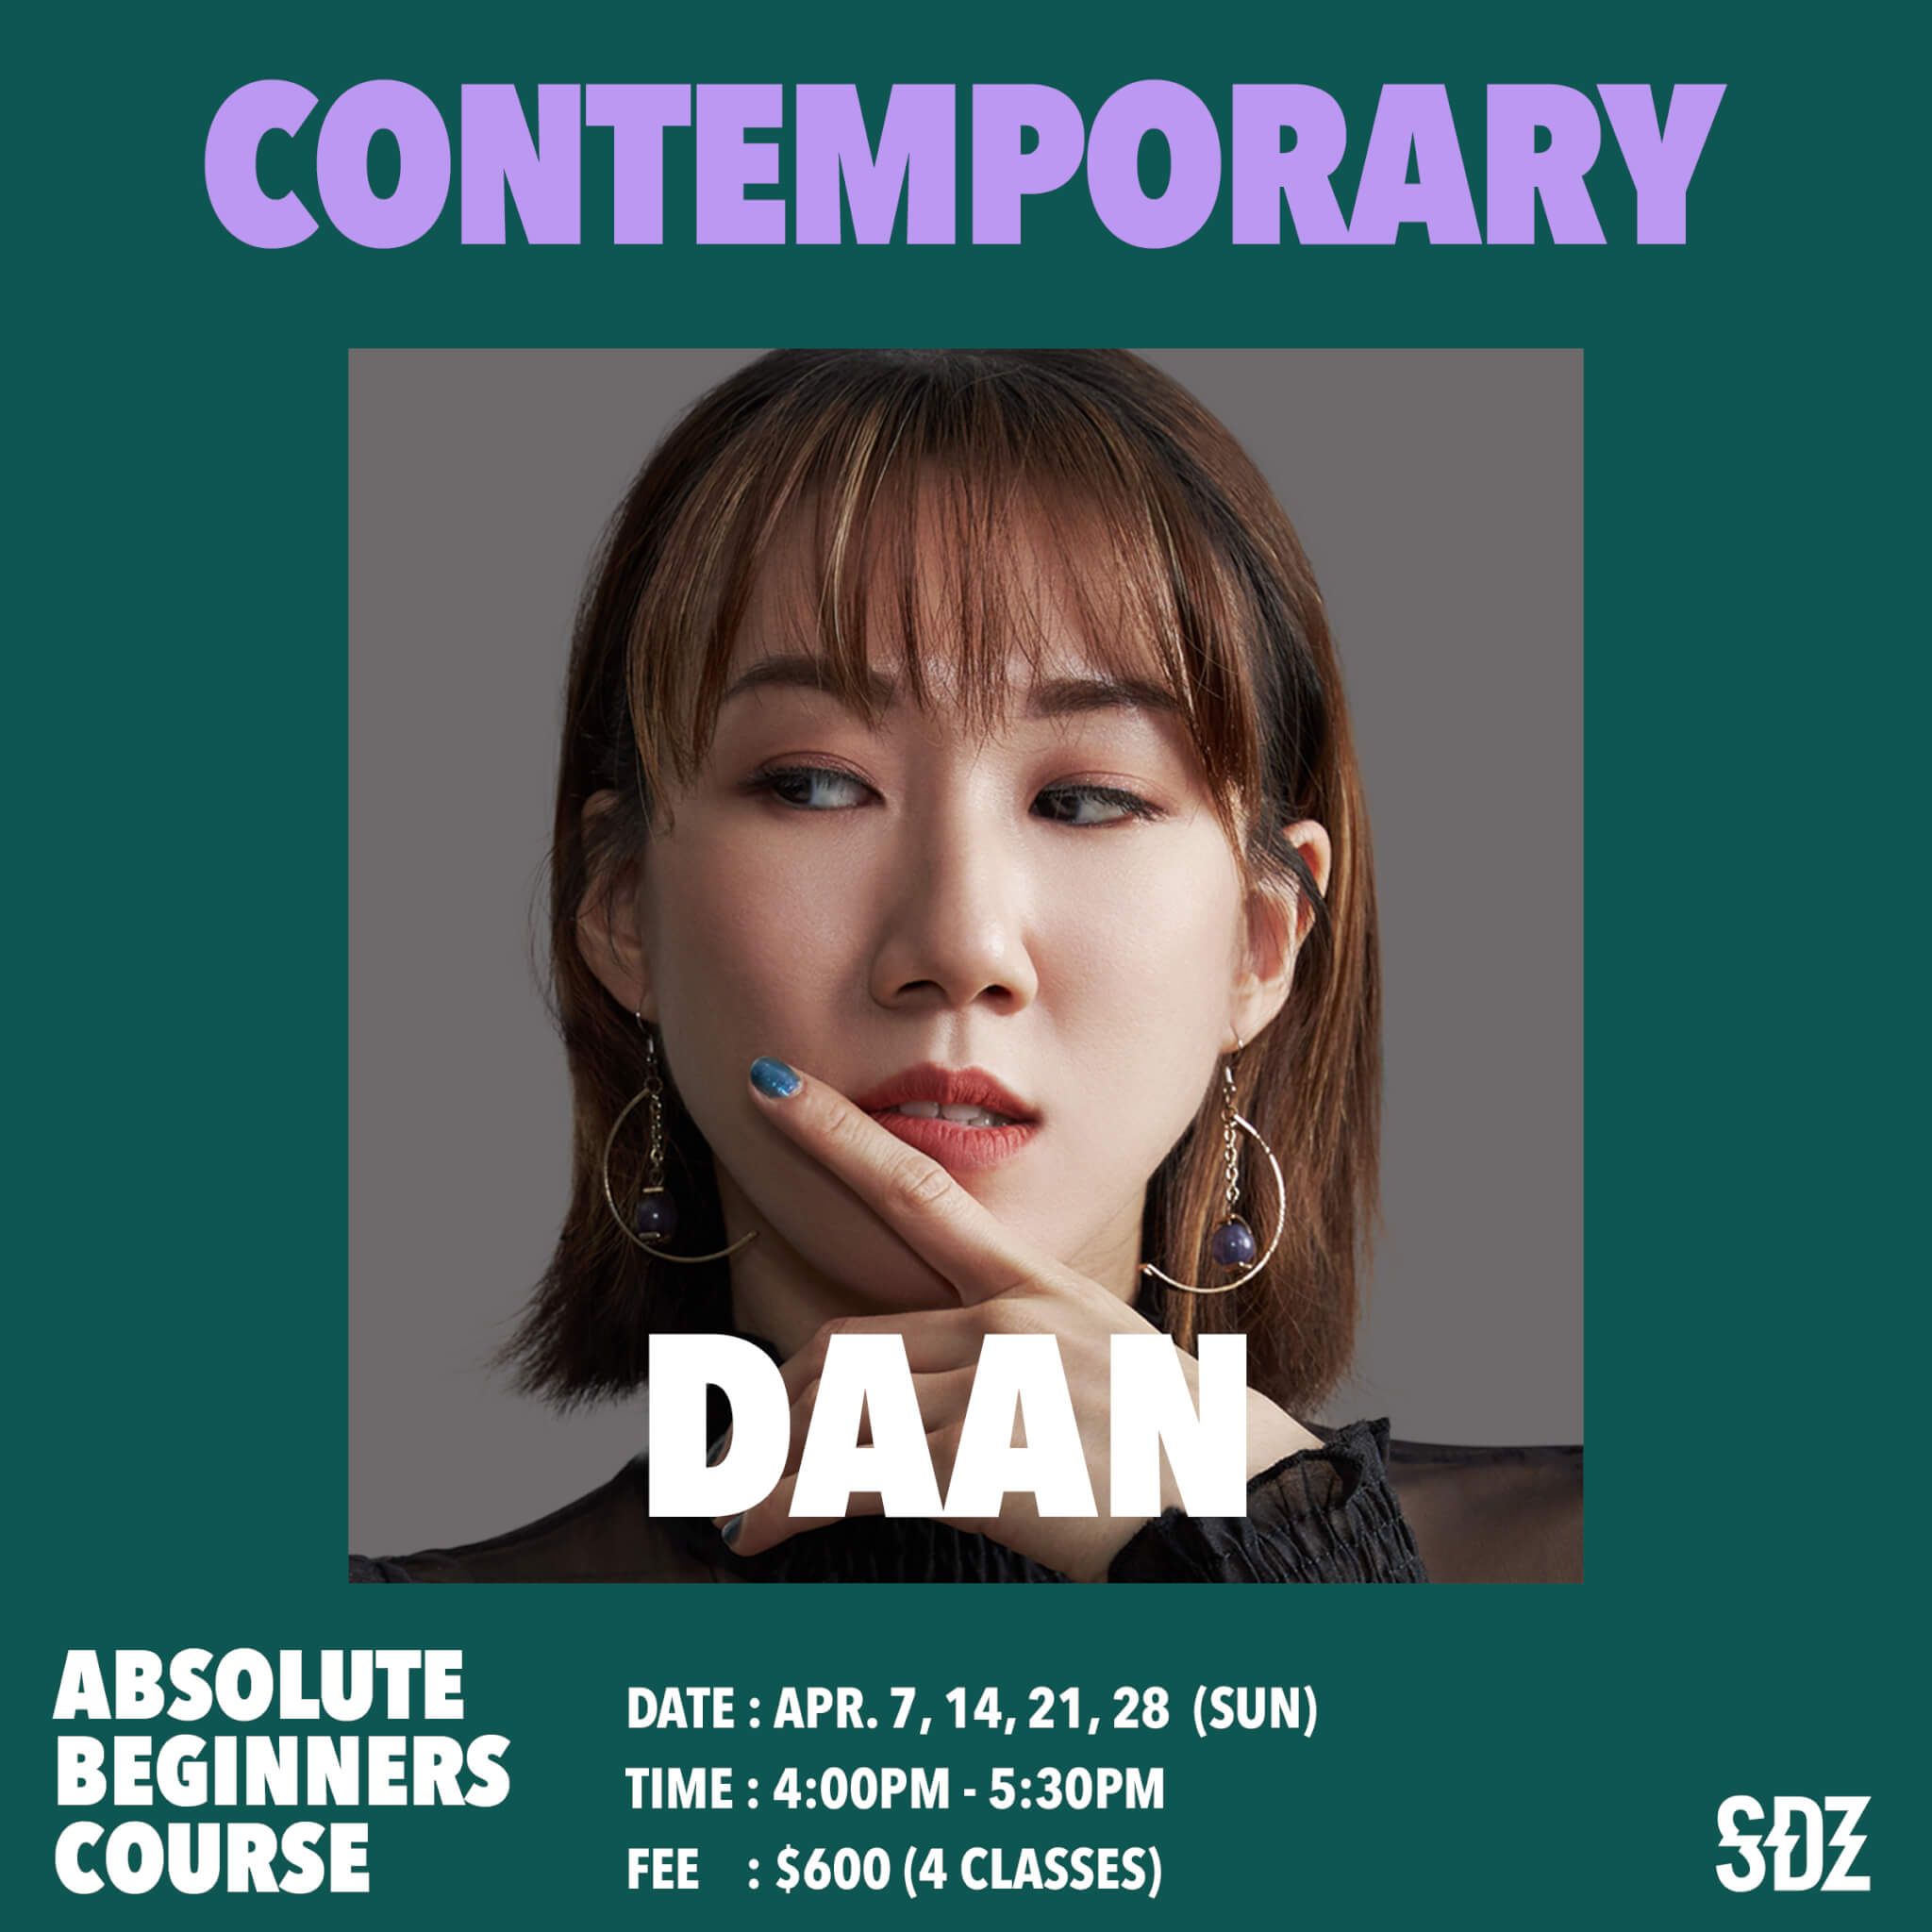 Absolute Beginners Course - Contemporary - Daan (4 Classes)